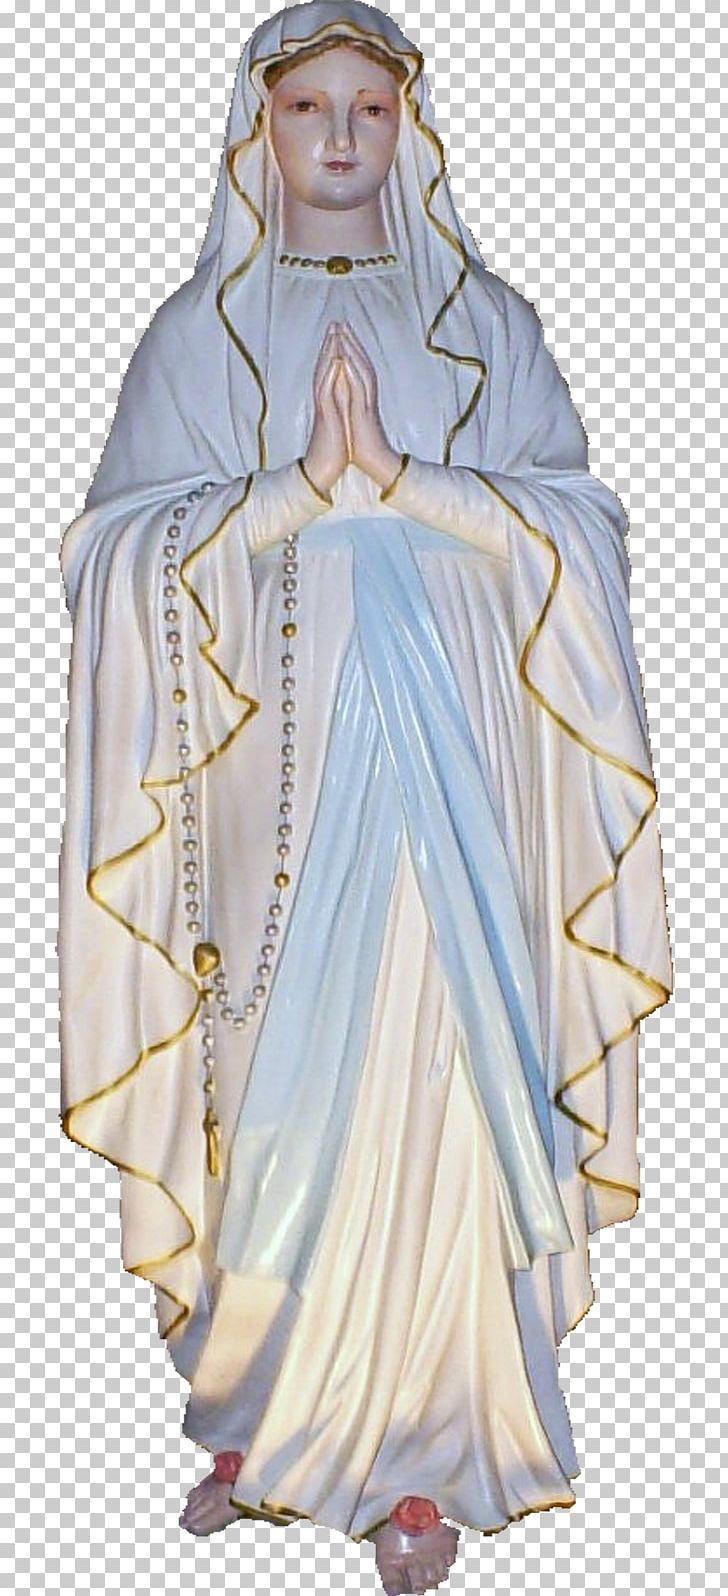 Mary Our Lady Of Lourdes Social Group Parish PNG, Clipart, Brauch, Christian Church, Costume, Costume Design, Elite Free PNG Download